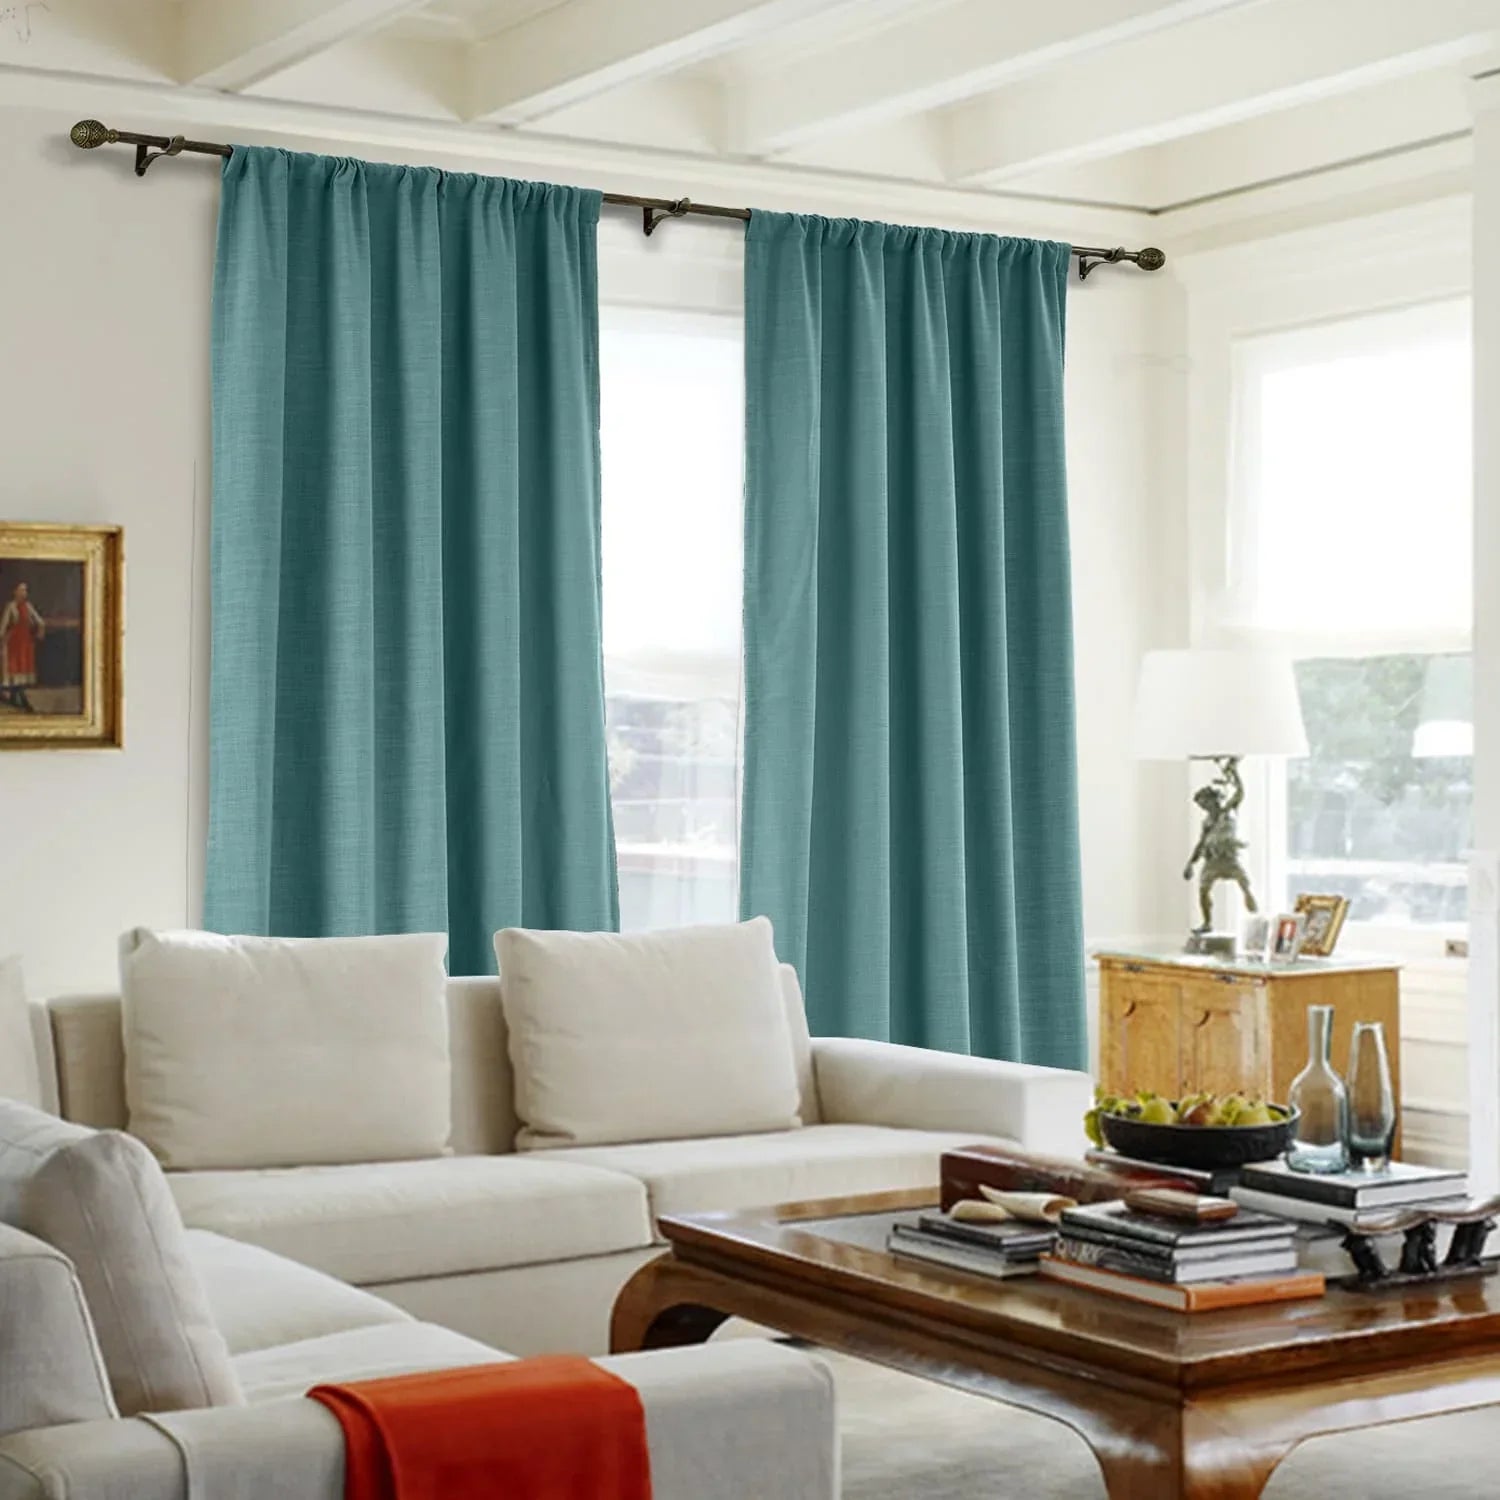 Loomy Design Curtain in polyester-cotton blend, soft top, living room Soft top 